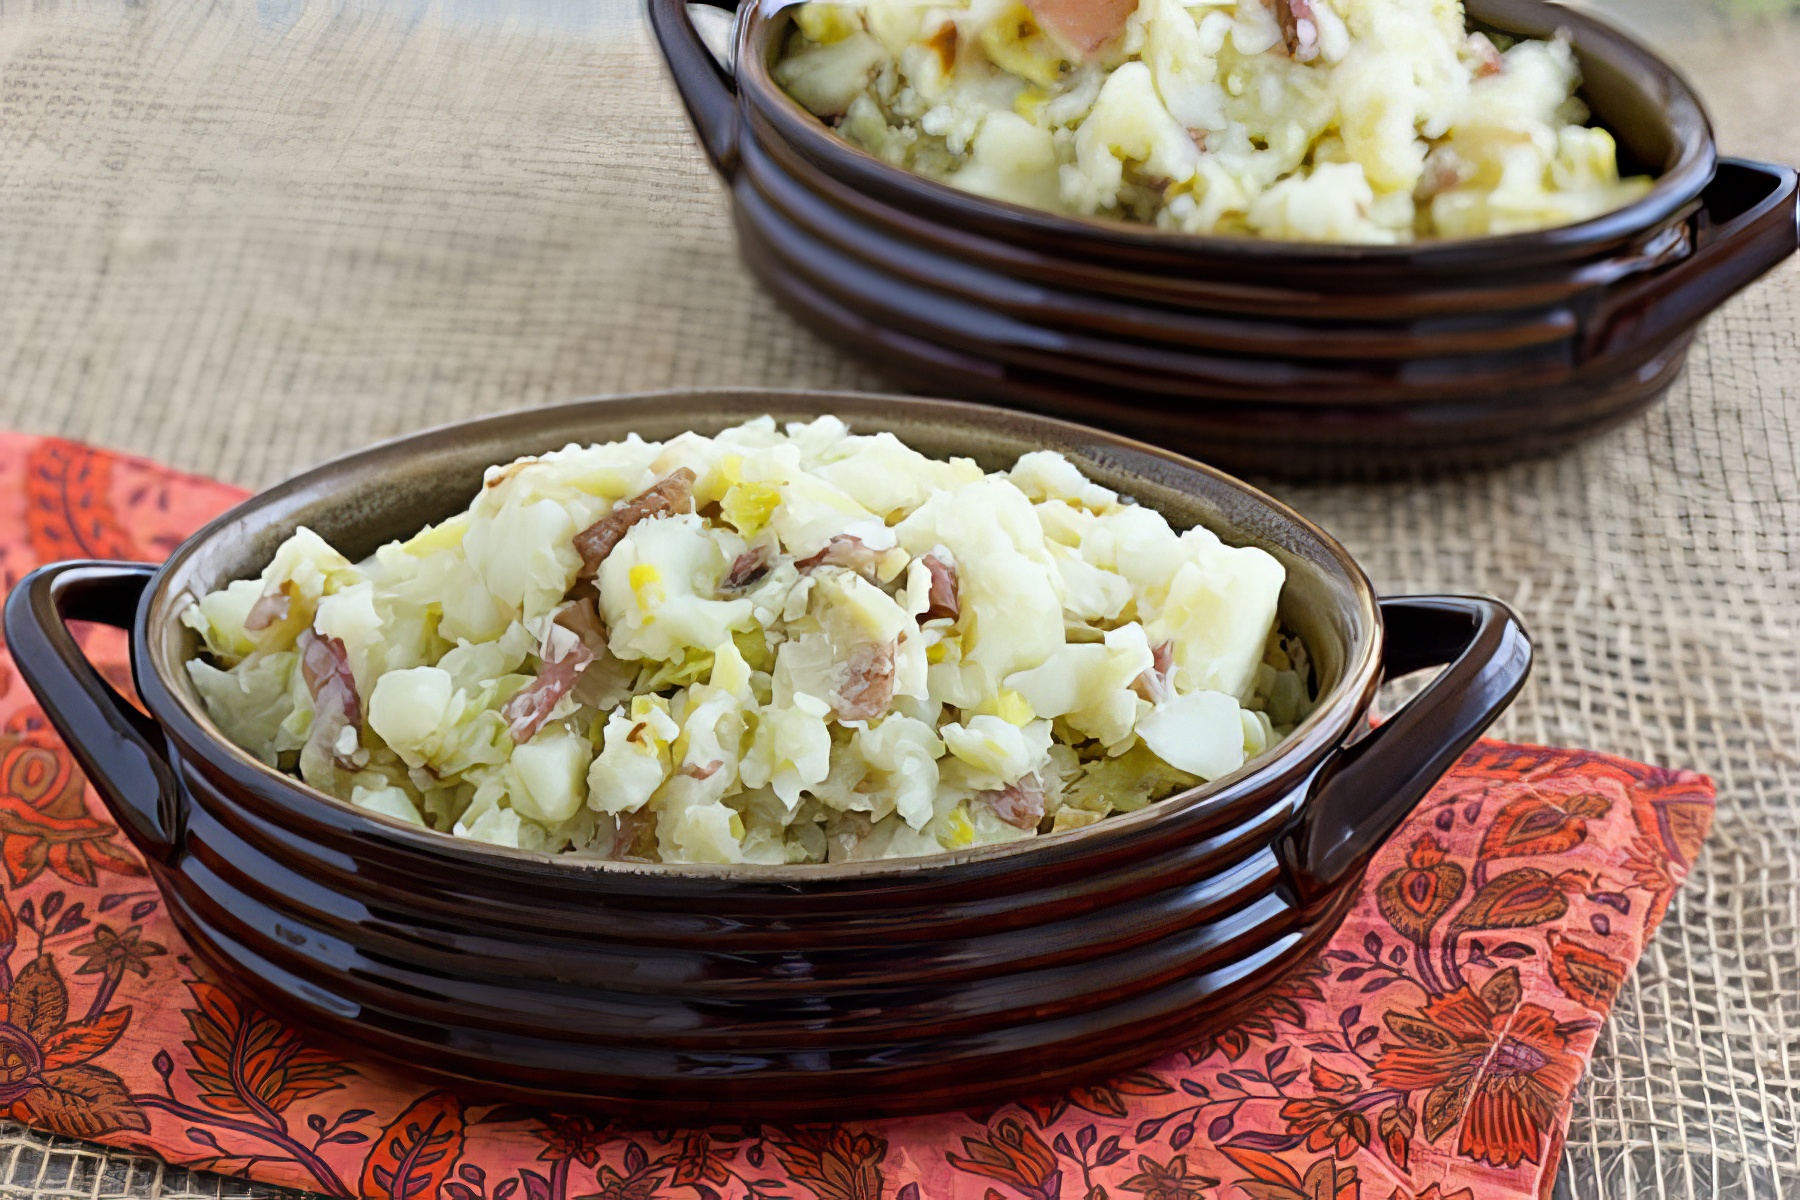 mashed red potatoes with leeks being served